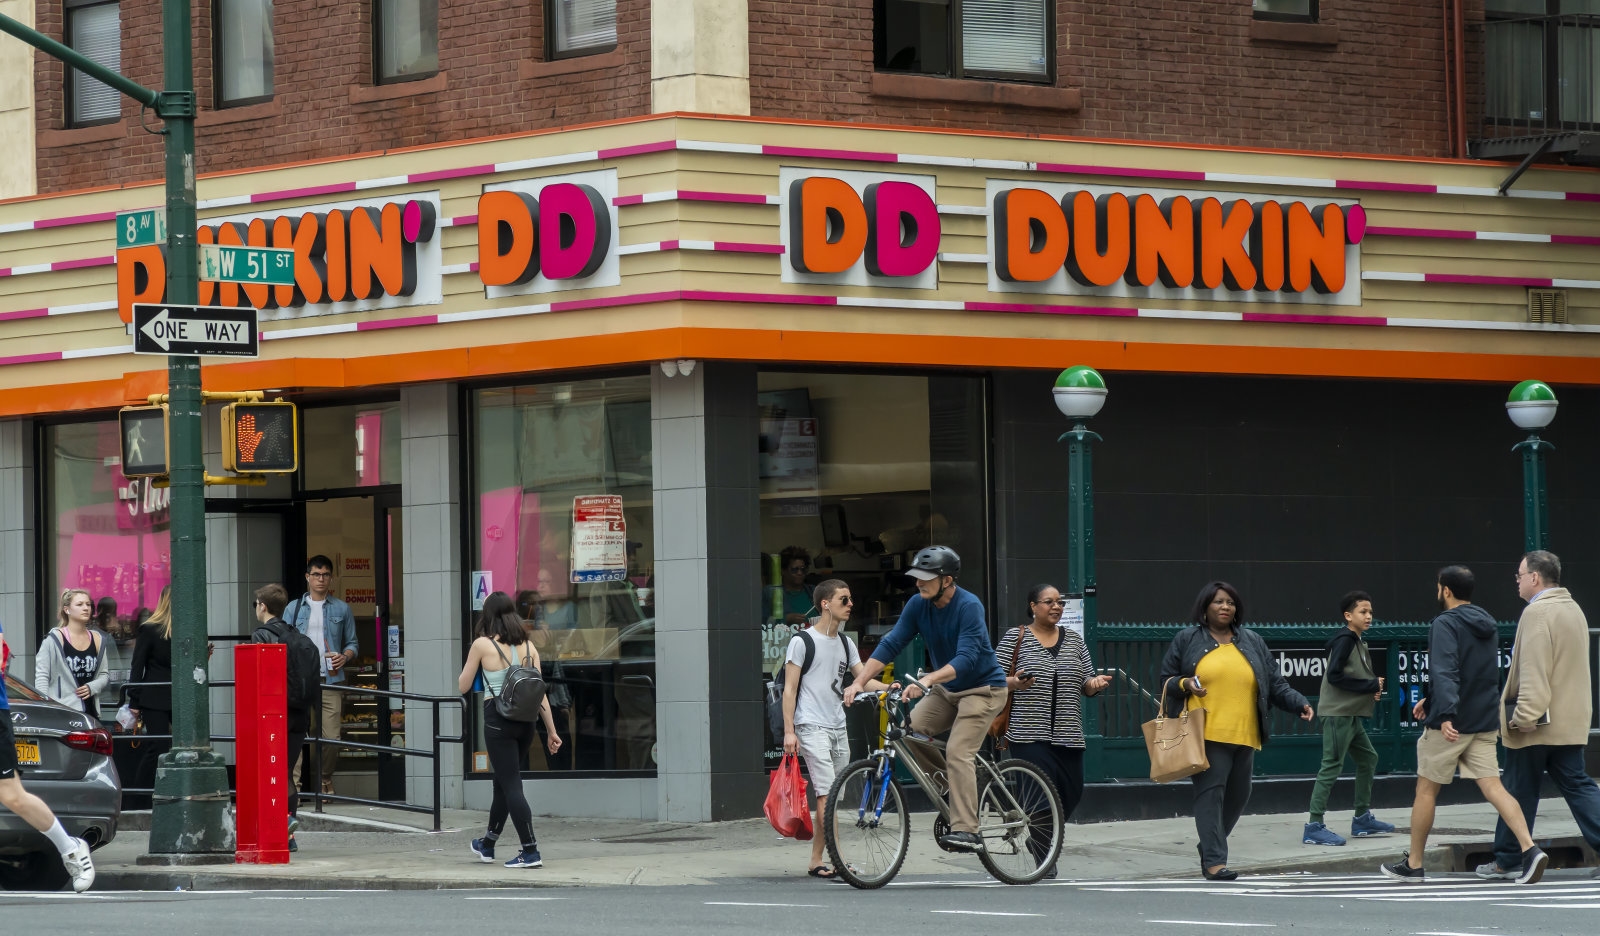 After Math: The New York AG sues Dunkin Donuts over hacking charges | DeviceDaily.com